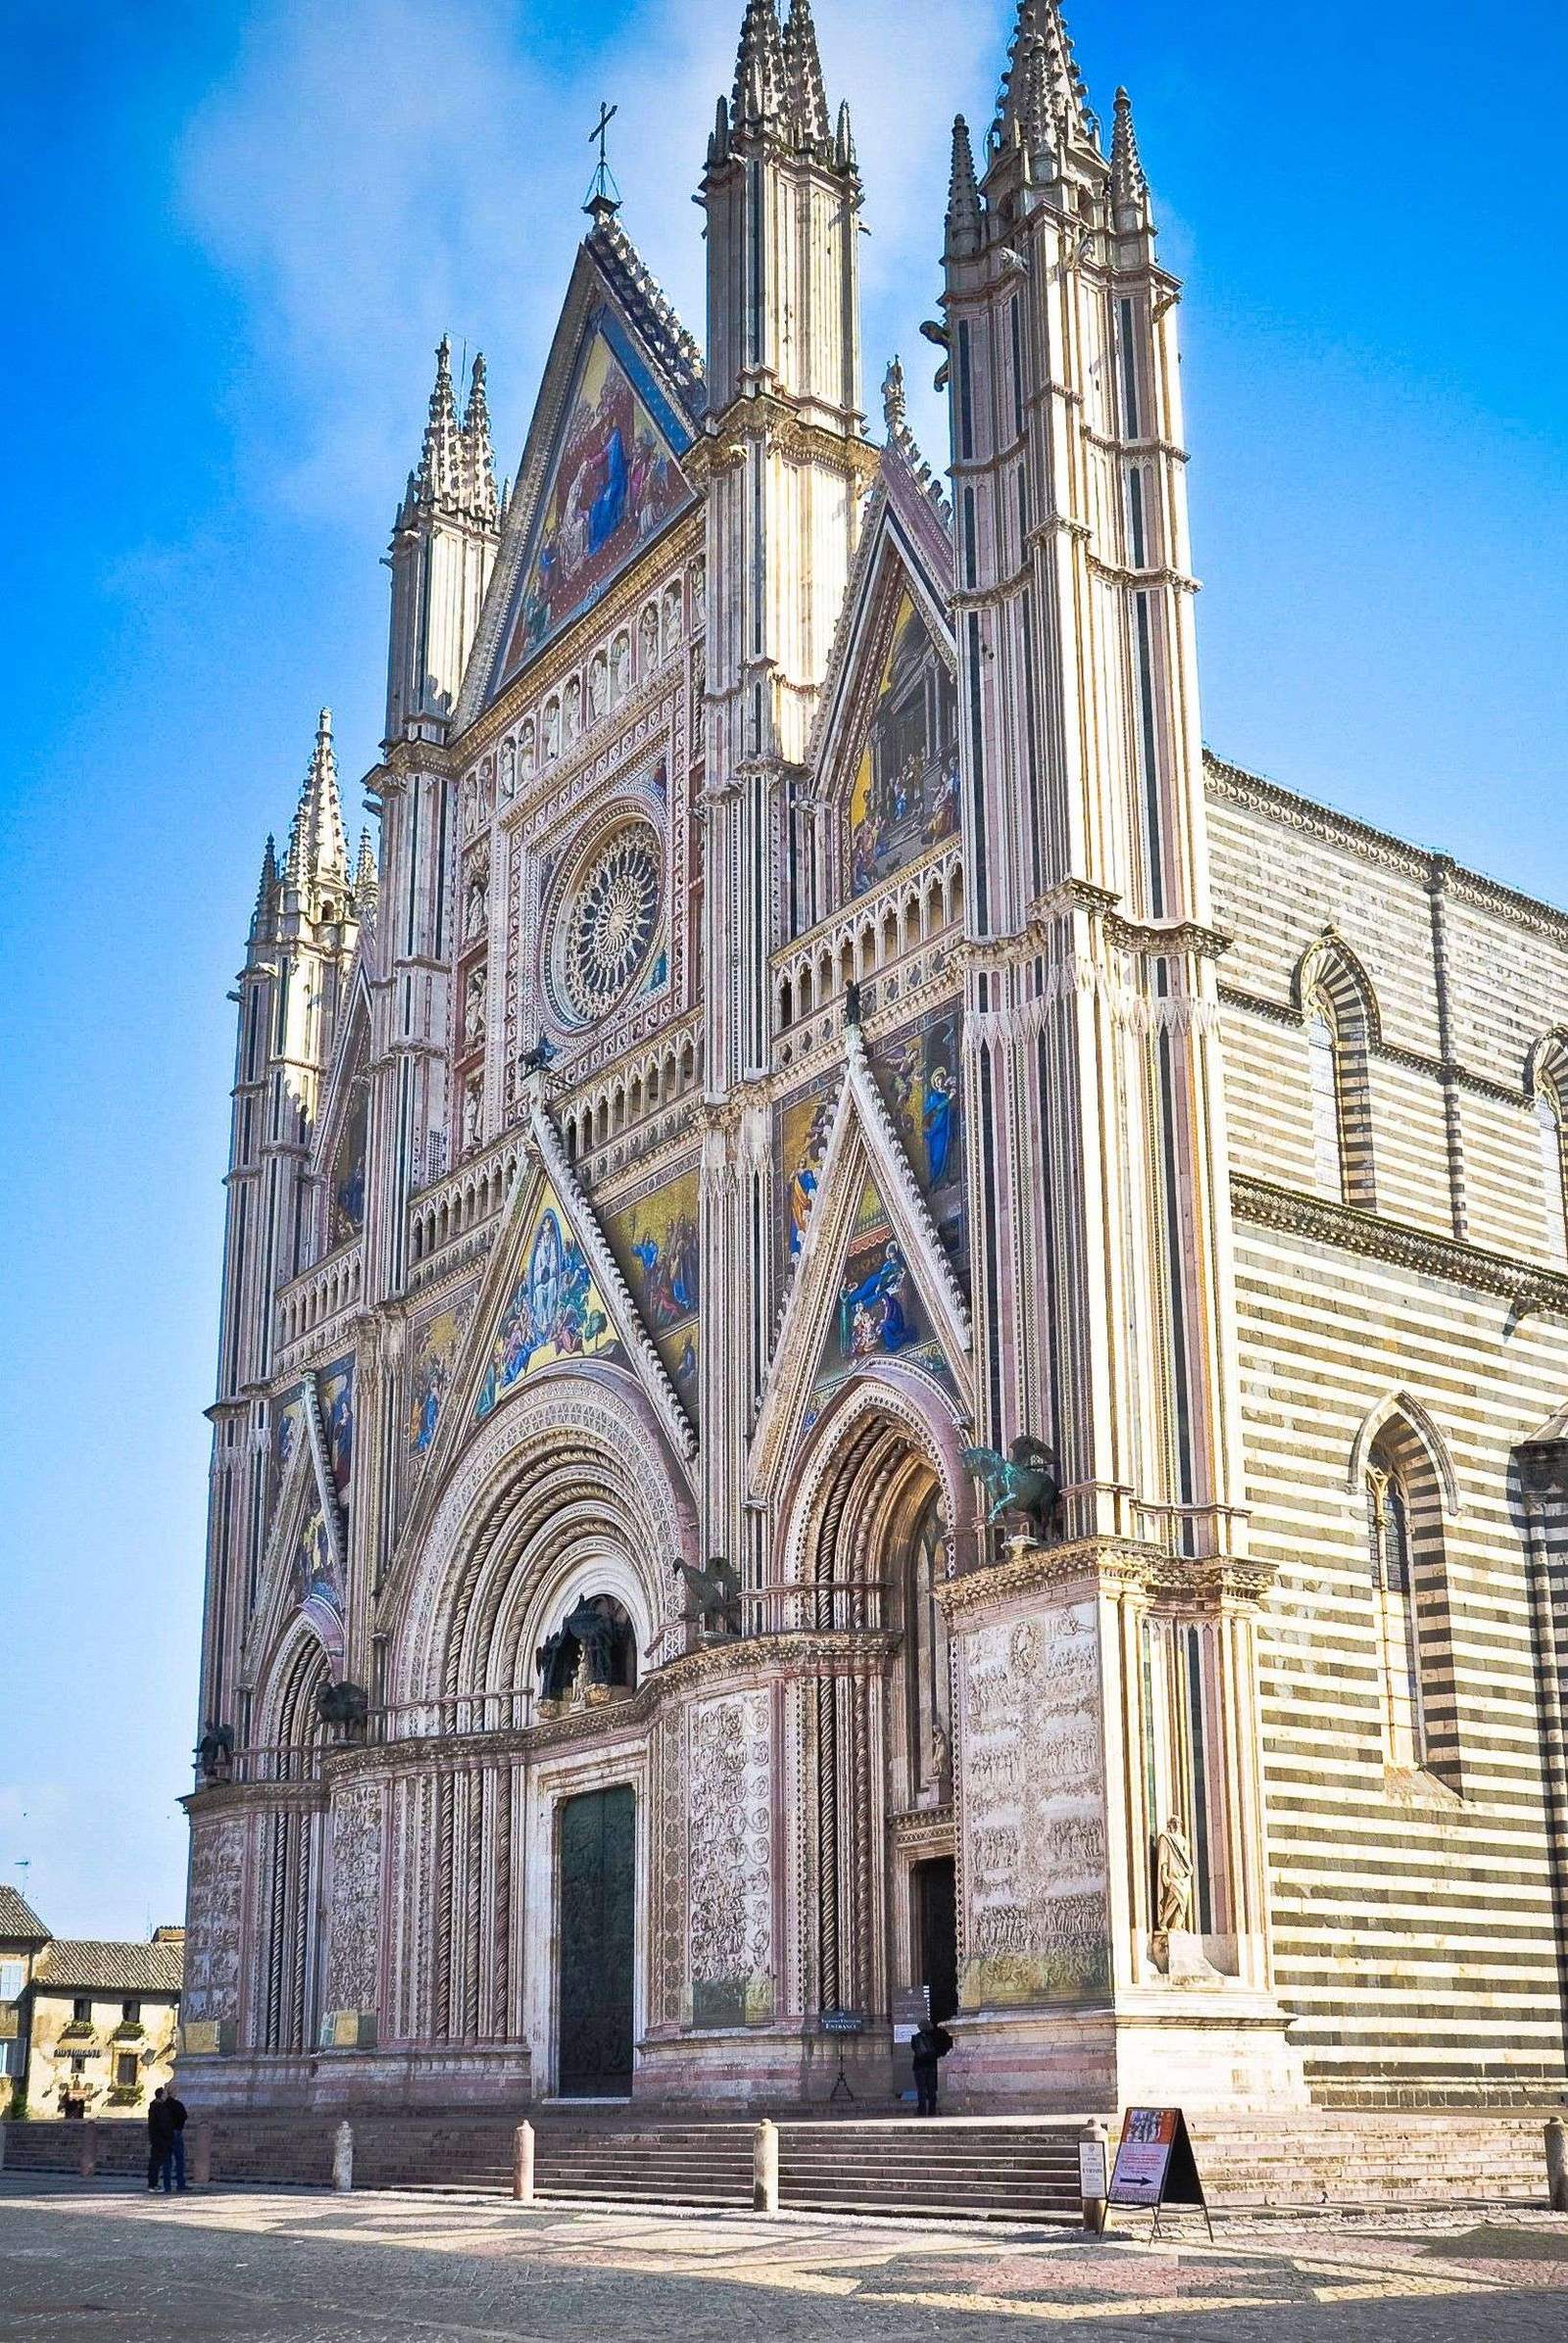 Orvieto Cathedral of Italy – 20 x 30 / Colored